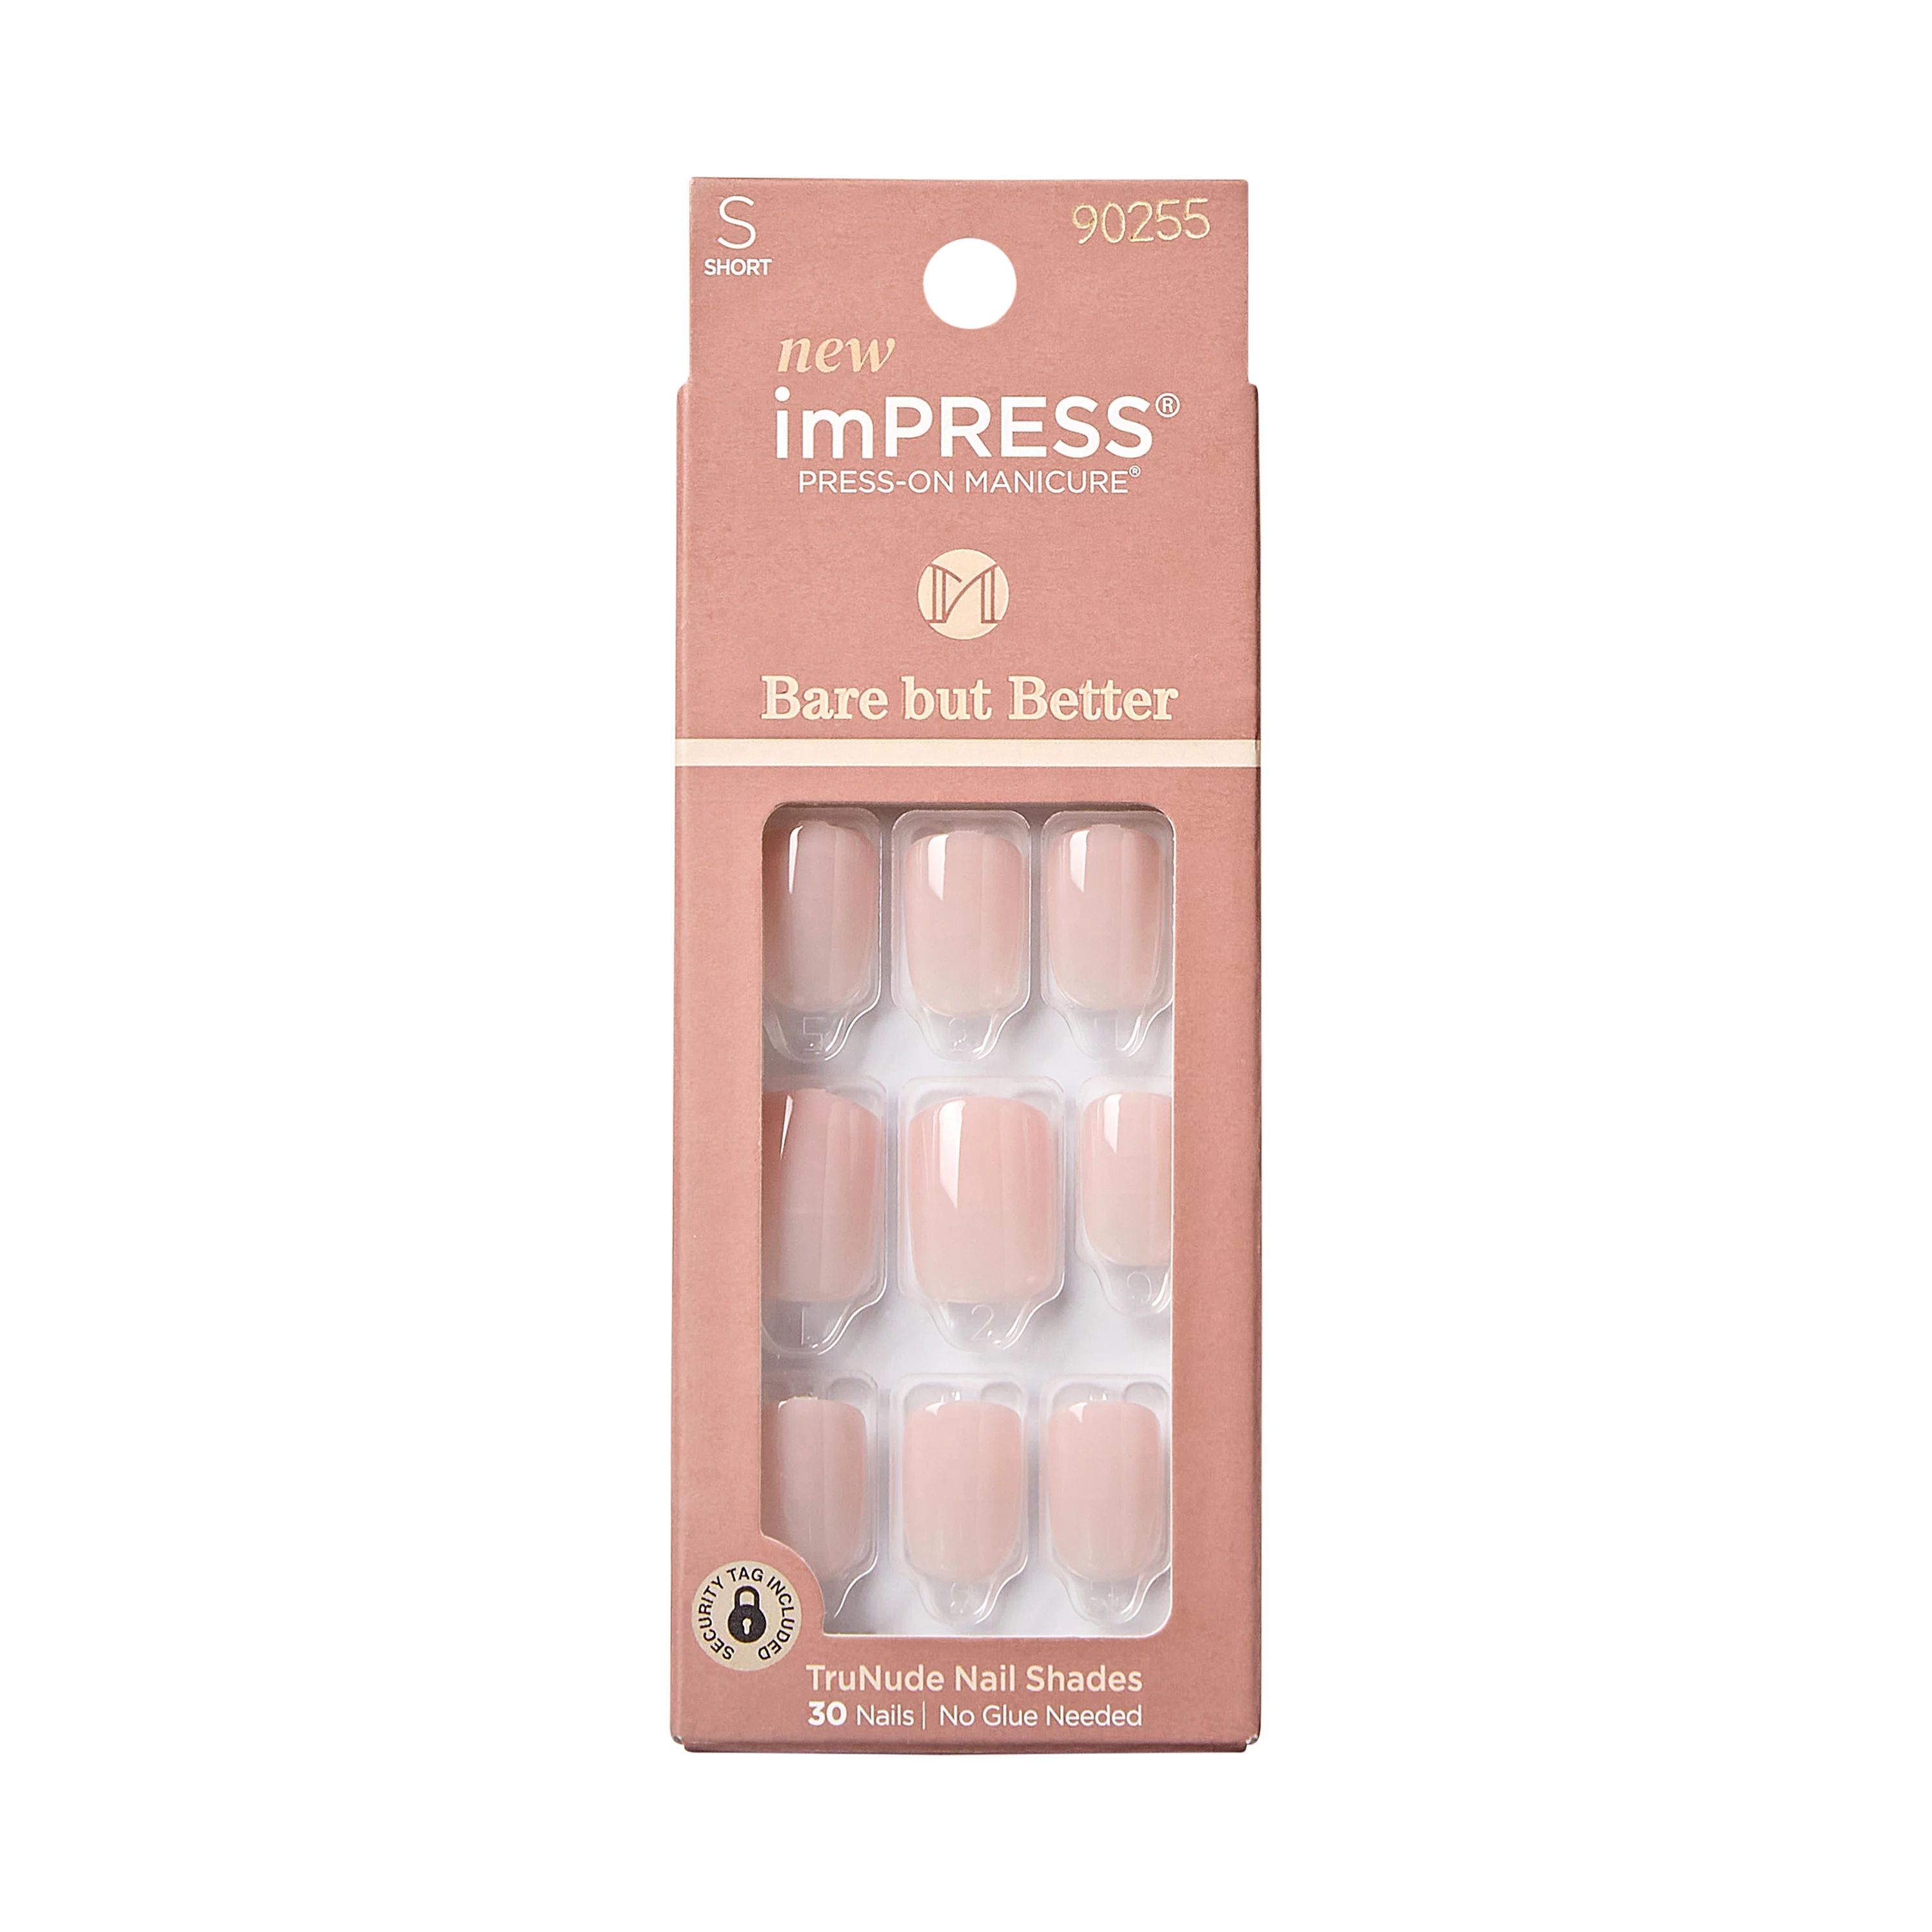 KISS imPRESS Bare but better Short Square Gel Press-On Nails, Glossy Light Pink, 30 Pieces | Walmart (US)